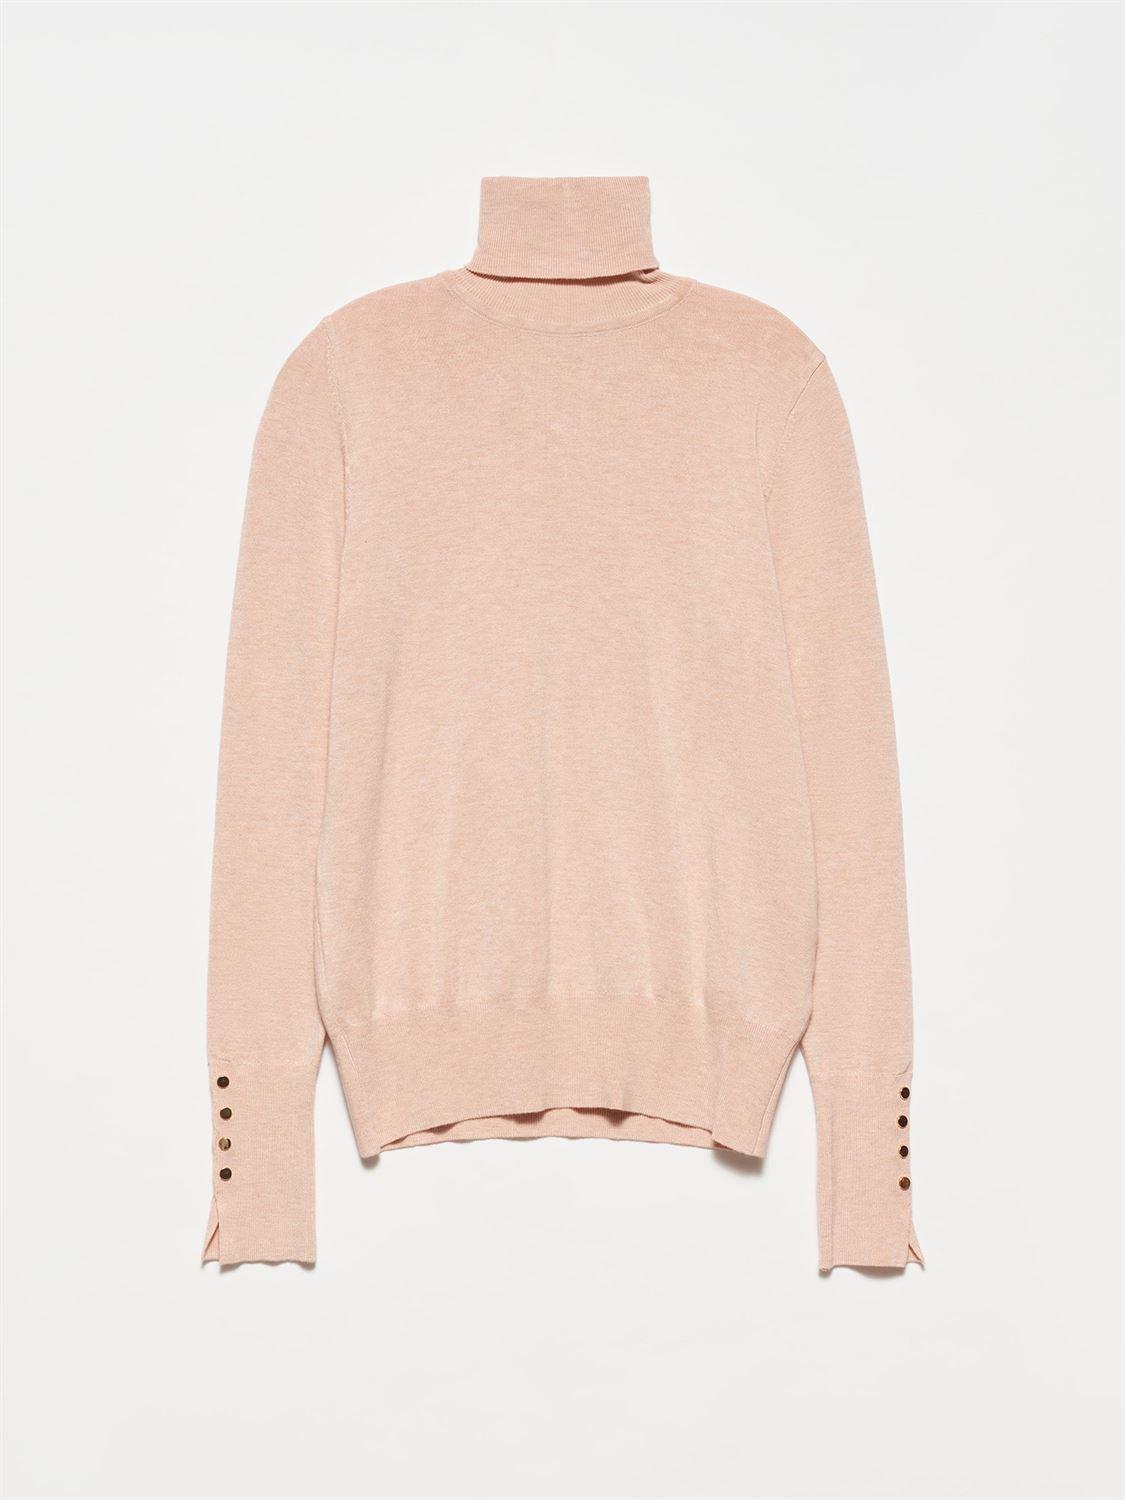 Turtleneck Sweater With Dropped Sleeves Pink / One Size ZEFASH